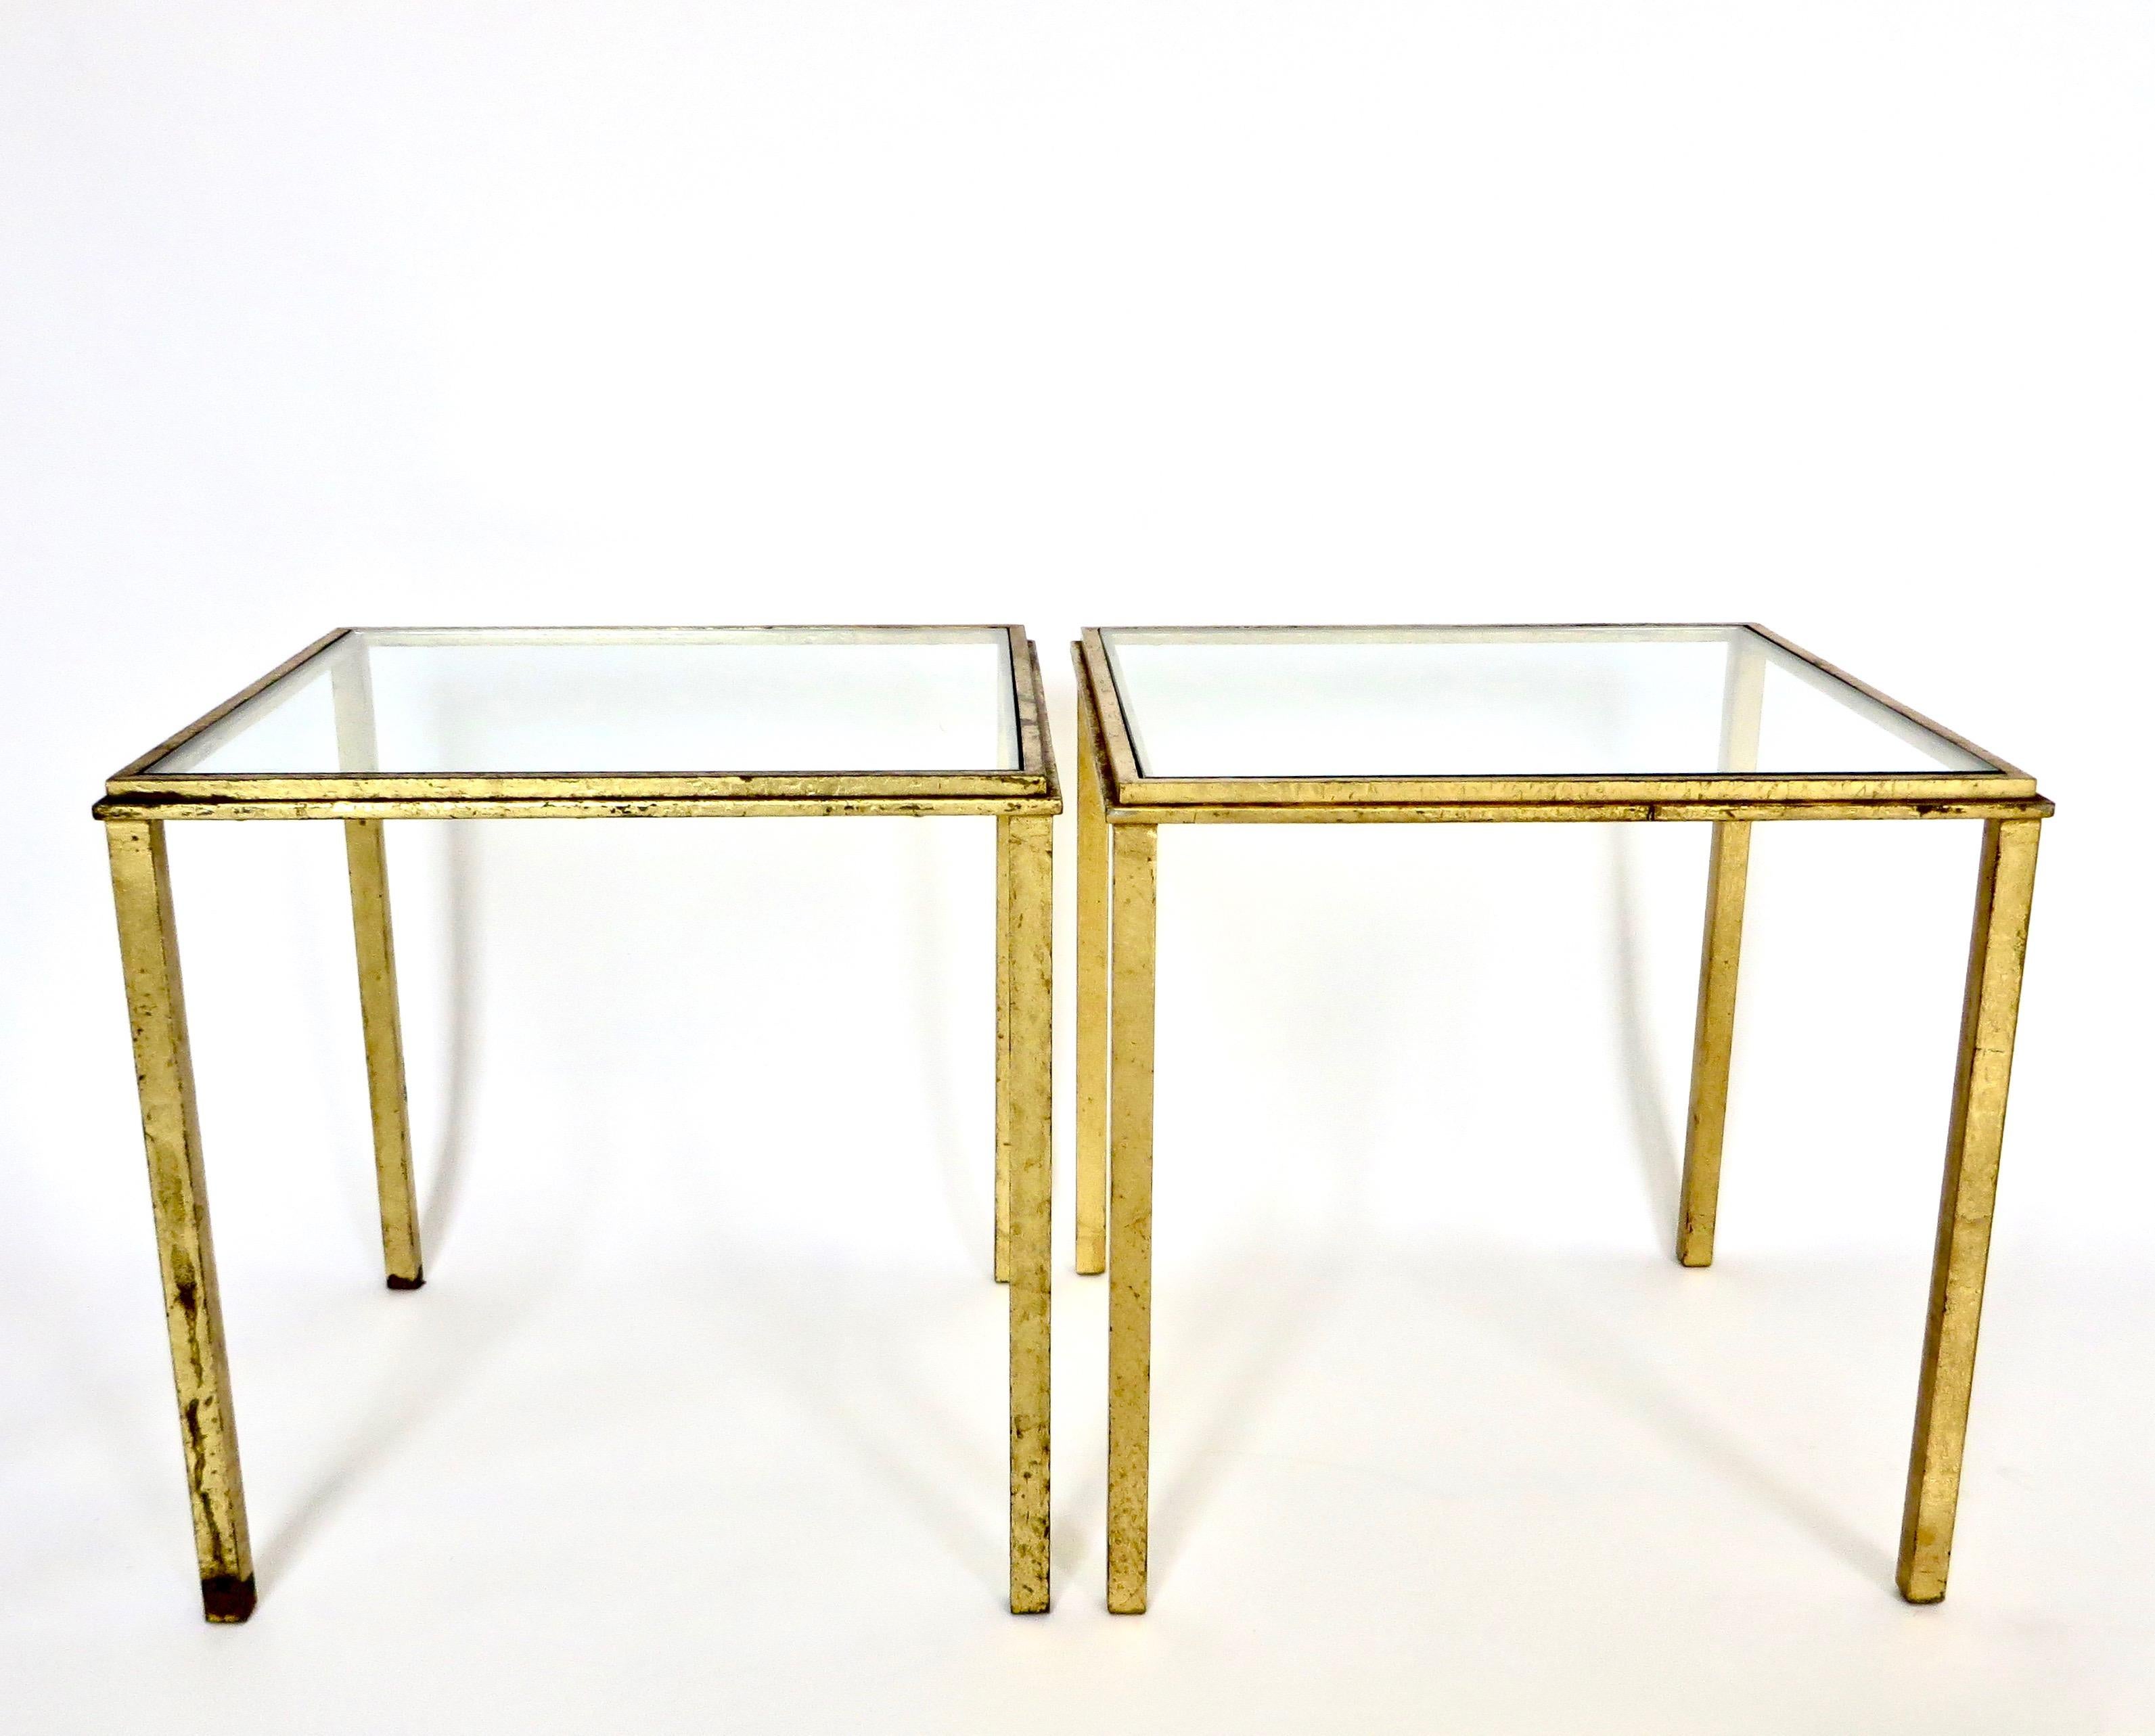 A pair of signed Roger Thibier gilded iron side tables or pair them as a small coffee table.
Patina as shown. Patina can be restored upon request.
Stamped R Thibier.